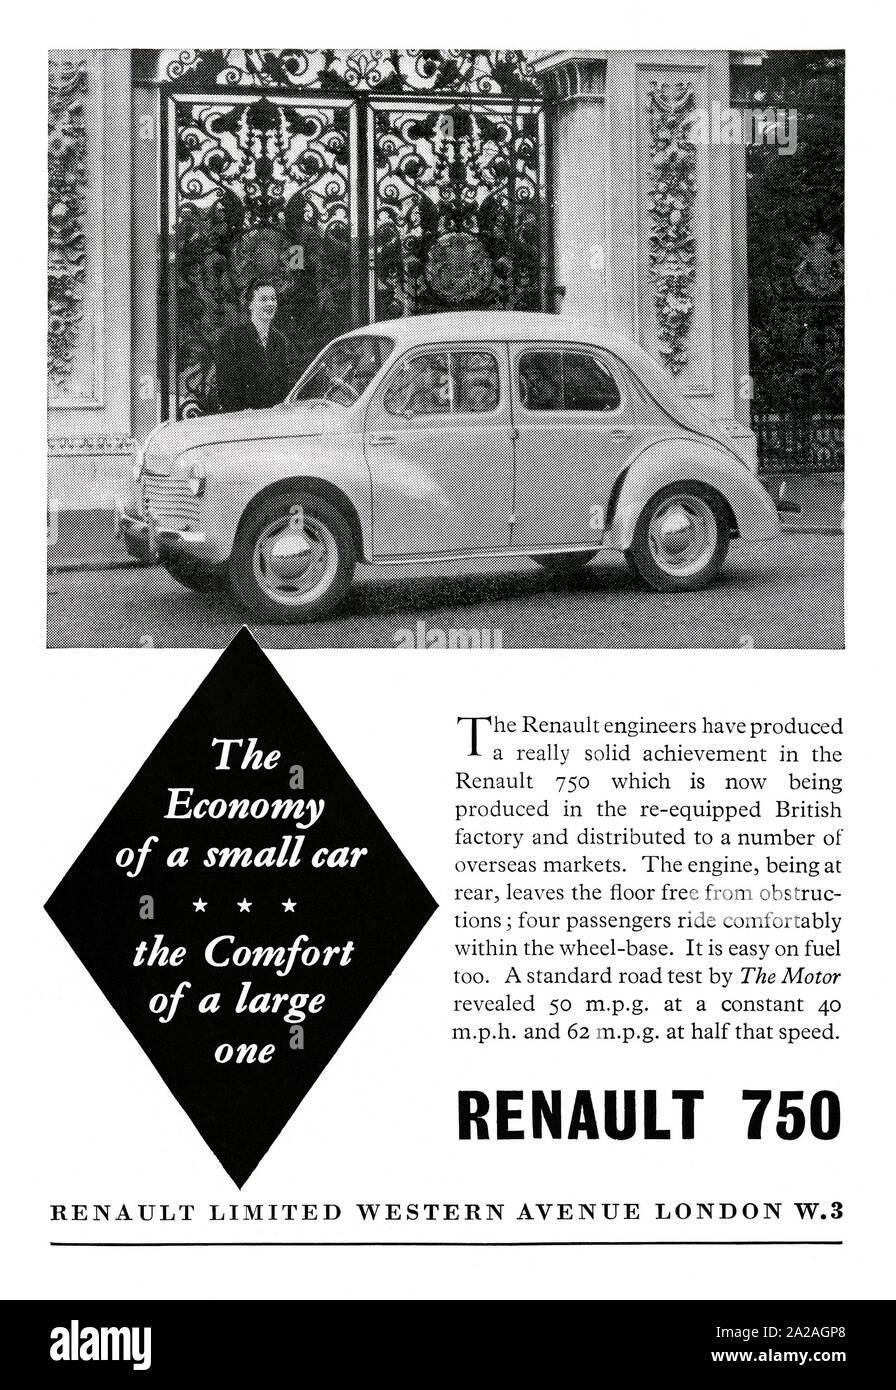 Advert for the Renault 750 (also known as the 4CV), 1951. The advert emphasises the small car's economy. The Renault 4CV (or quatre chevaux) was a rear-engined, rear-wheel-drive, 4-door economy small car manufactured and marketed by the French manufacturer Renault from August 1947 through to July 1961. Stock Photo